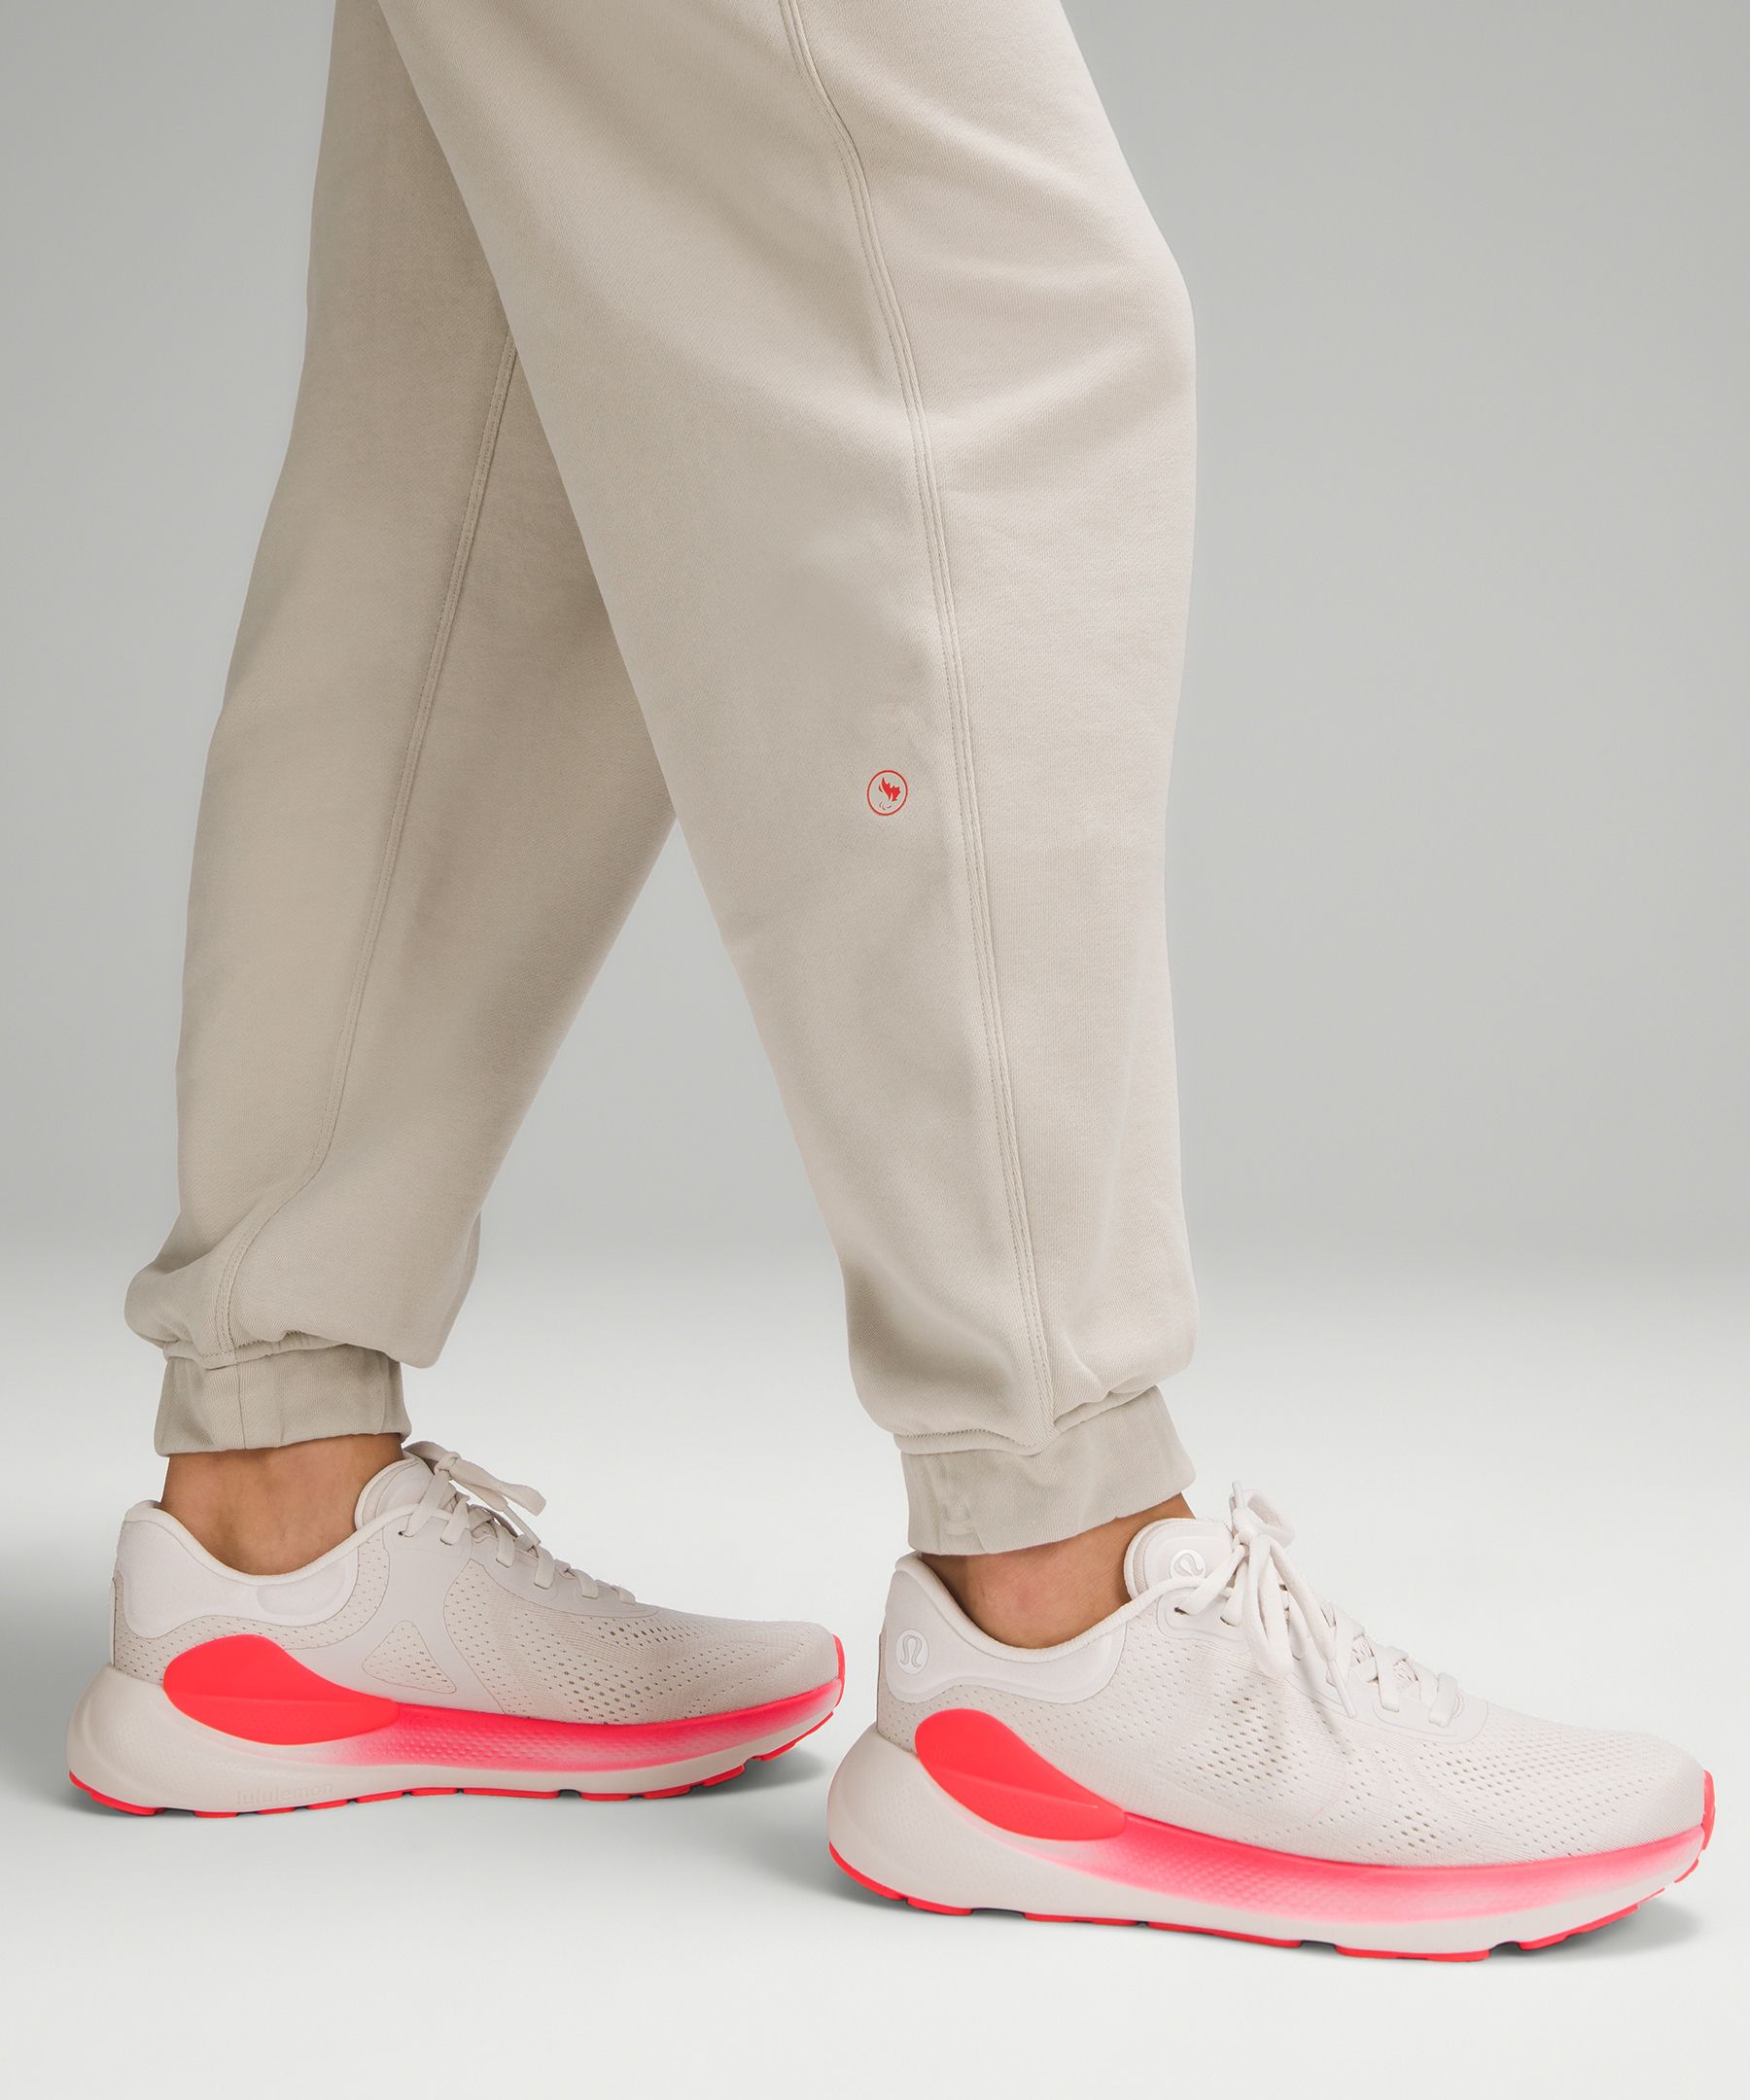 Team Canada Relaxed-Fit High-Rise Jogger *CPC Logo | Women's Joggers